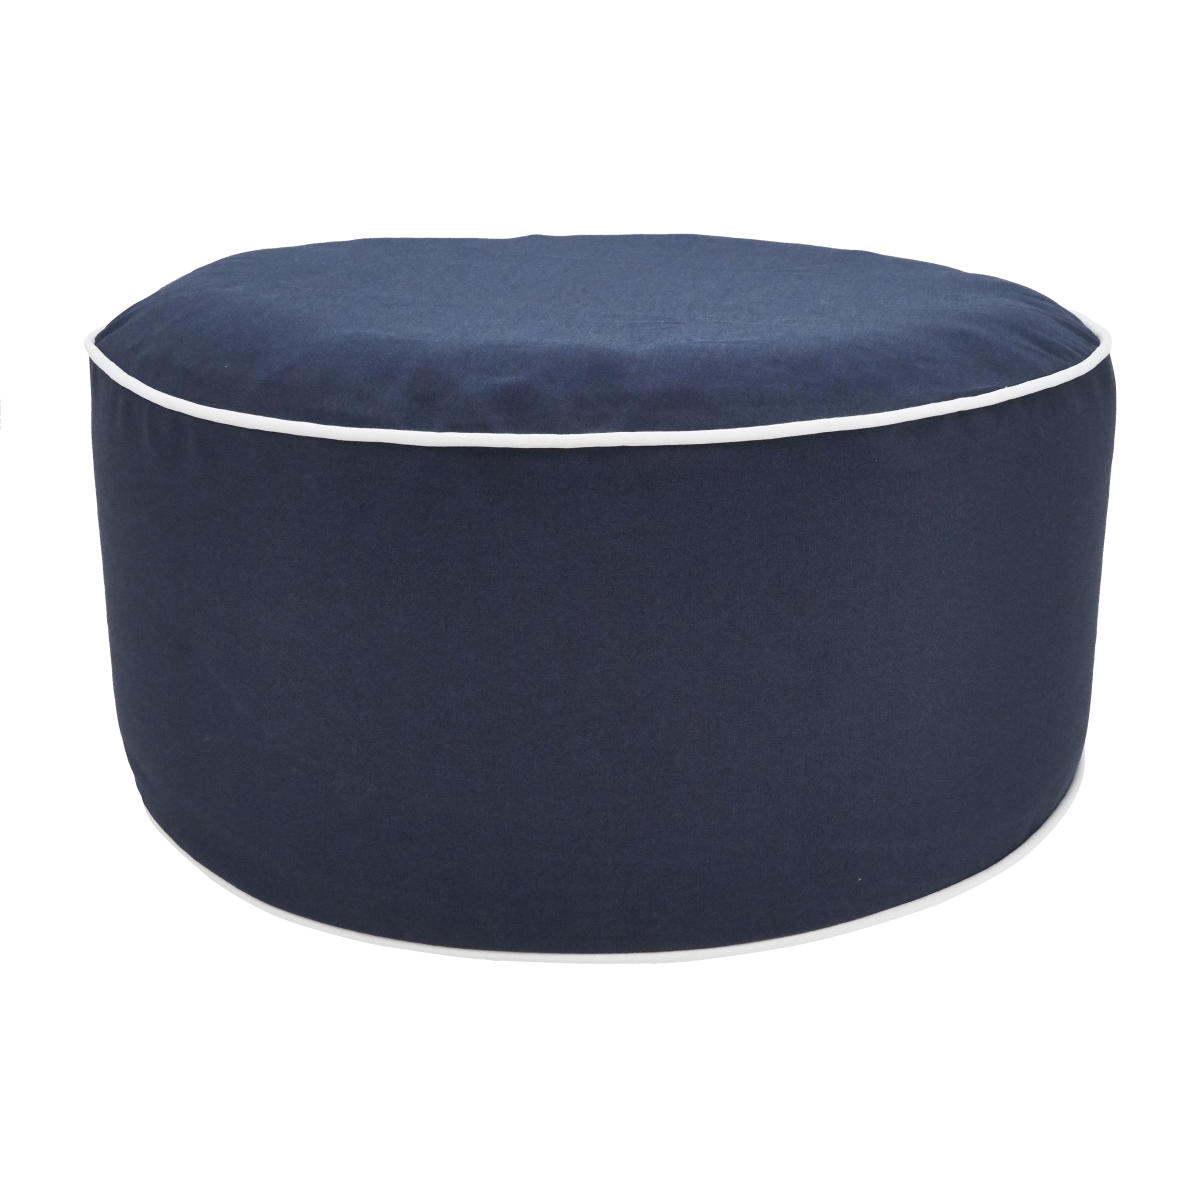 Pu906.bl Simply Solid Inflatable Ottoman, Blue